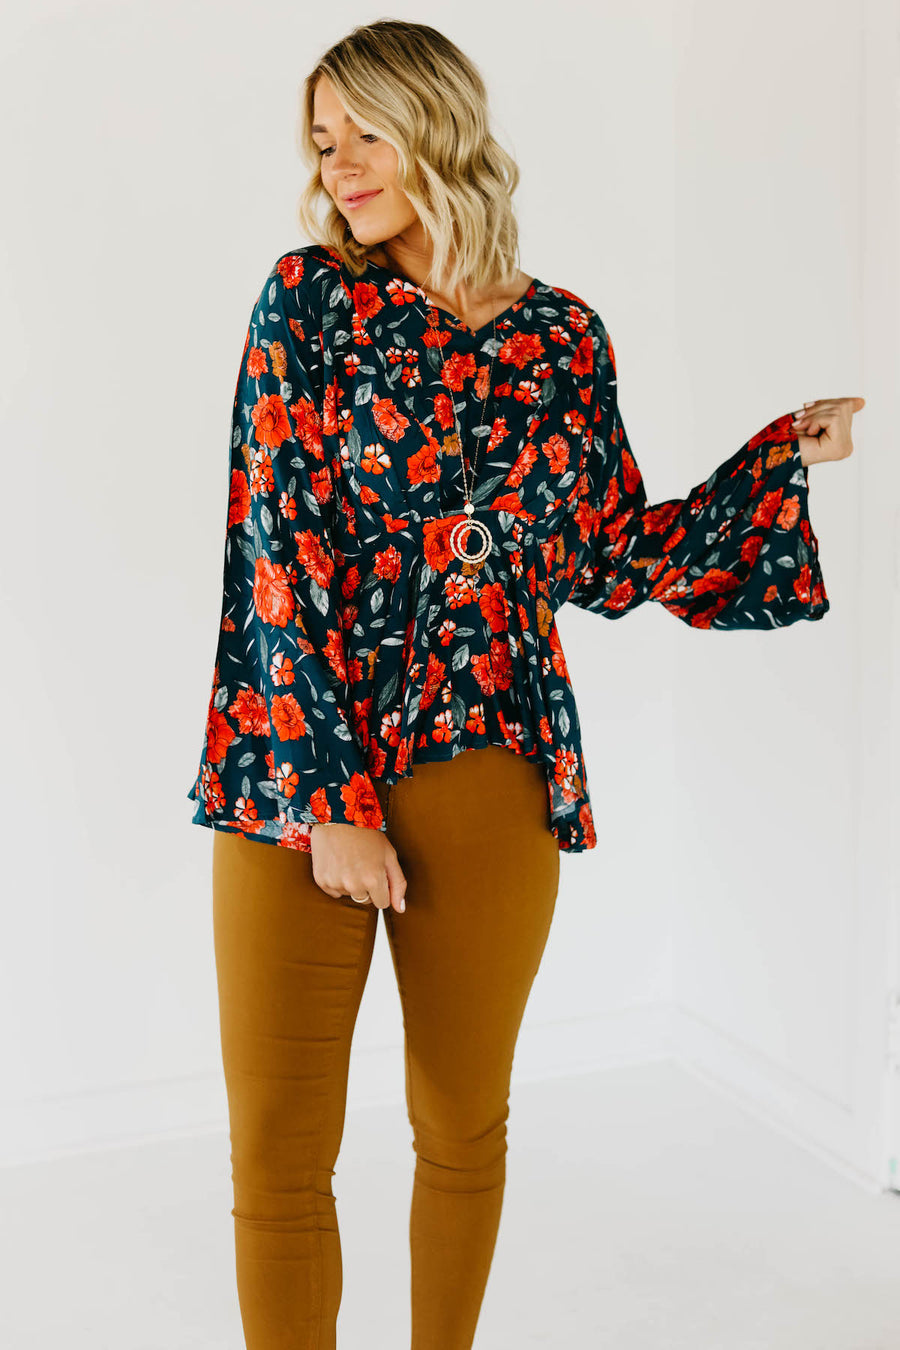 The Jovanni Floral Empire Top